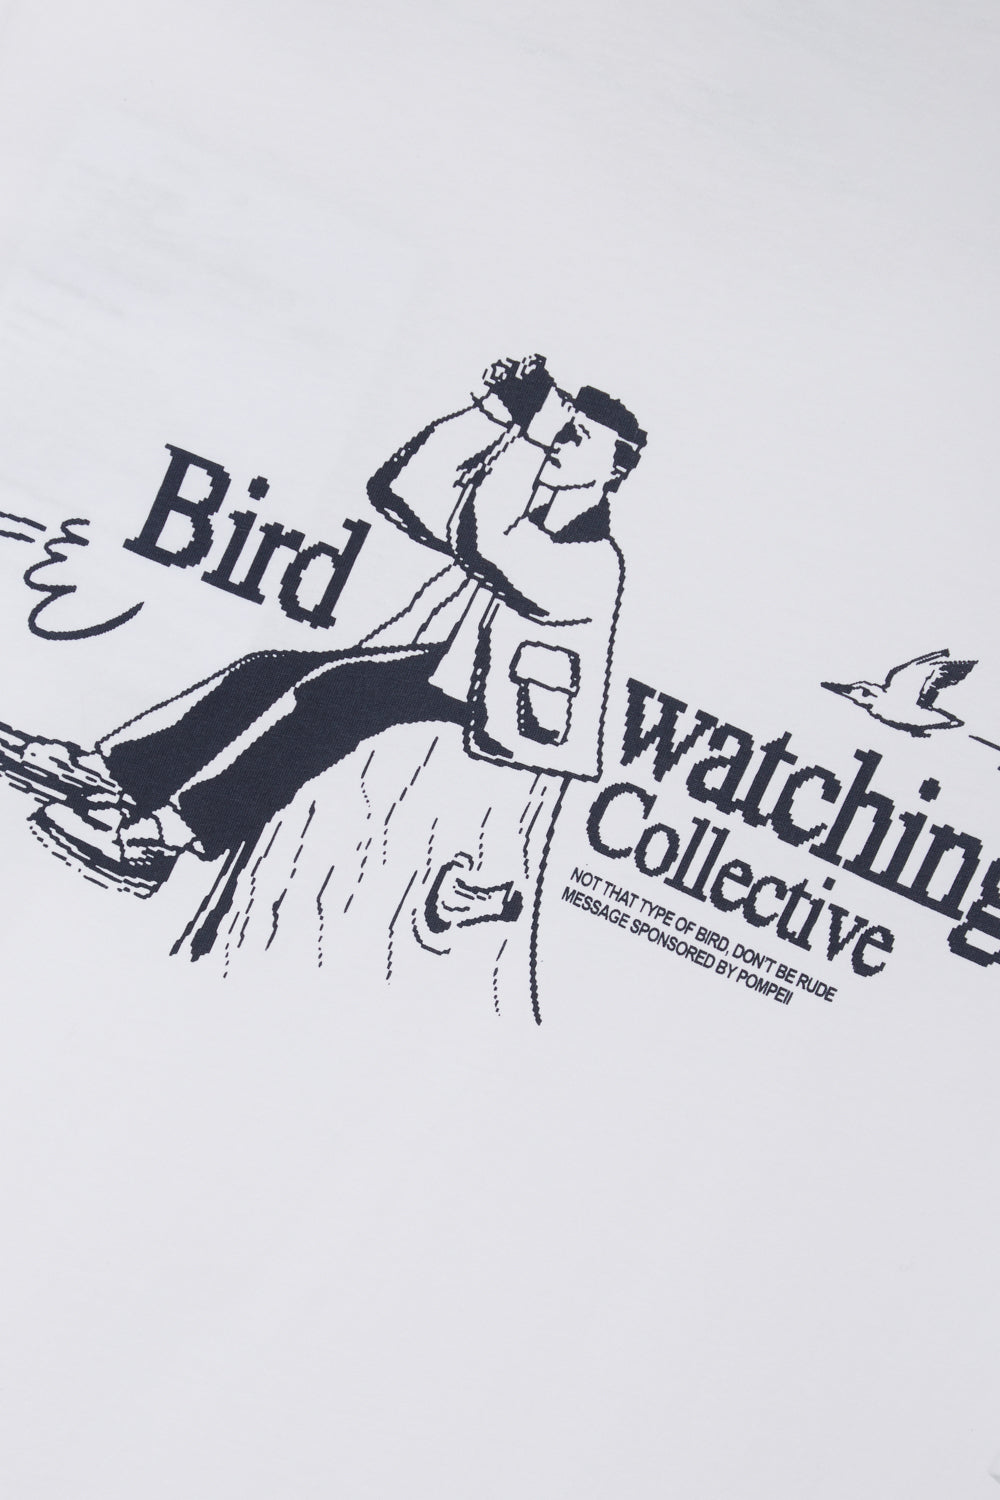 BIRDWATCHING COLLECTIVE GRAPHIC TEE